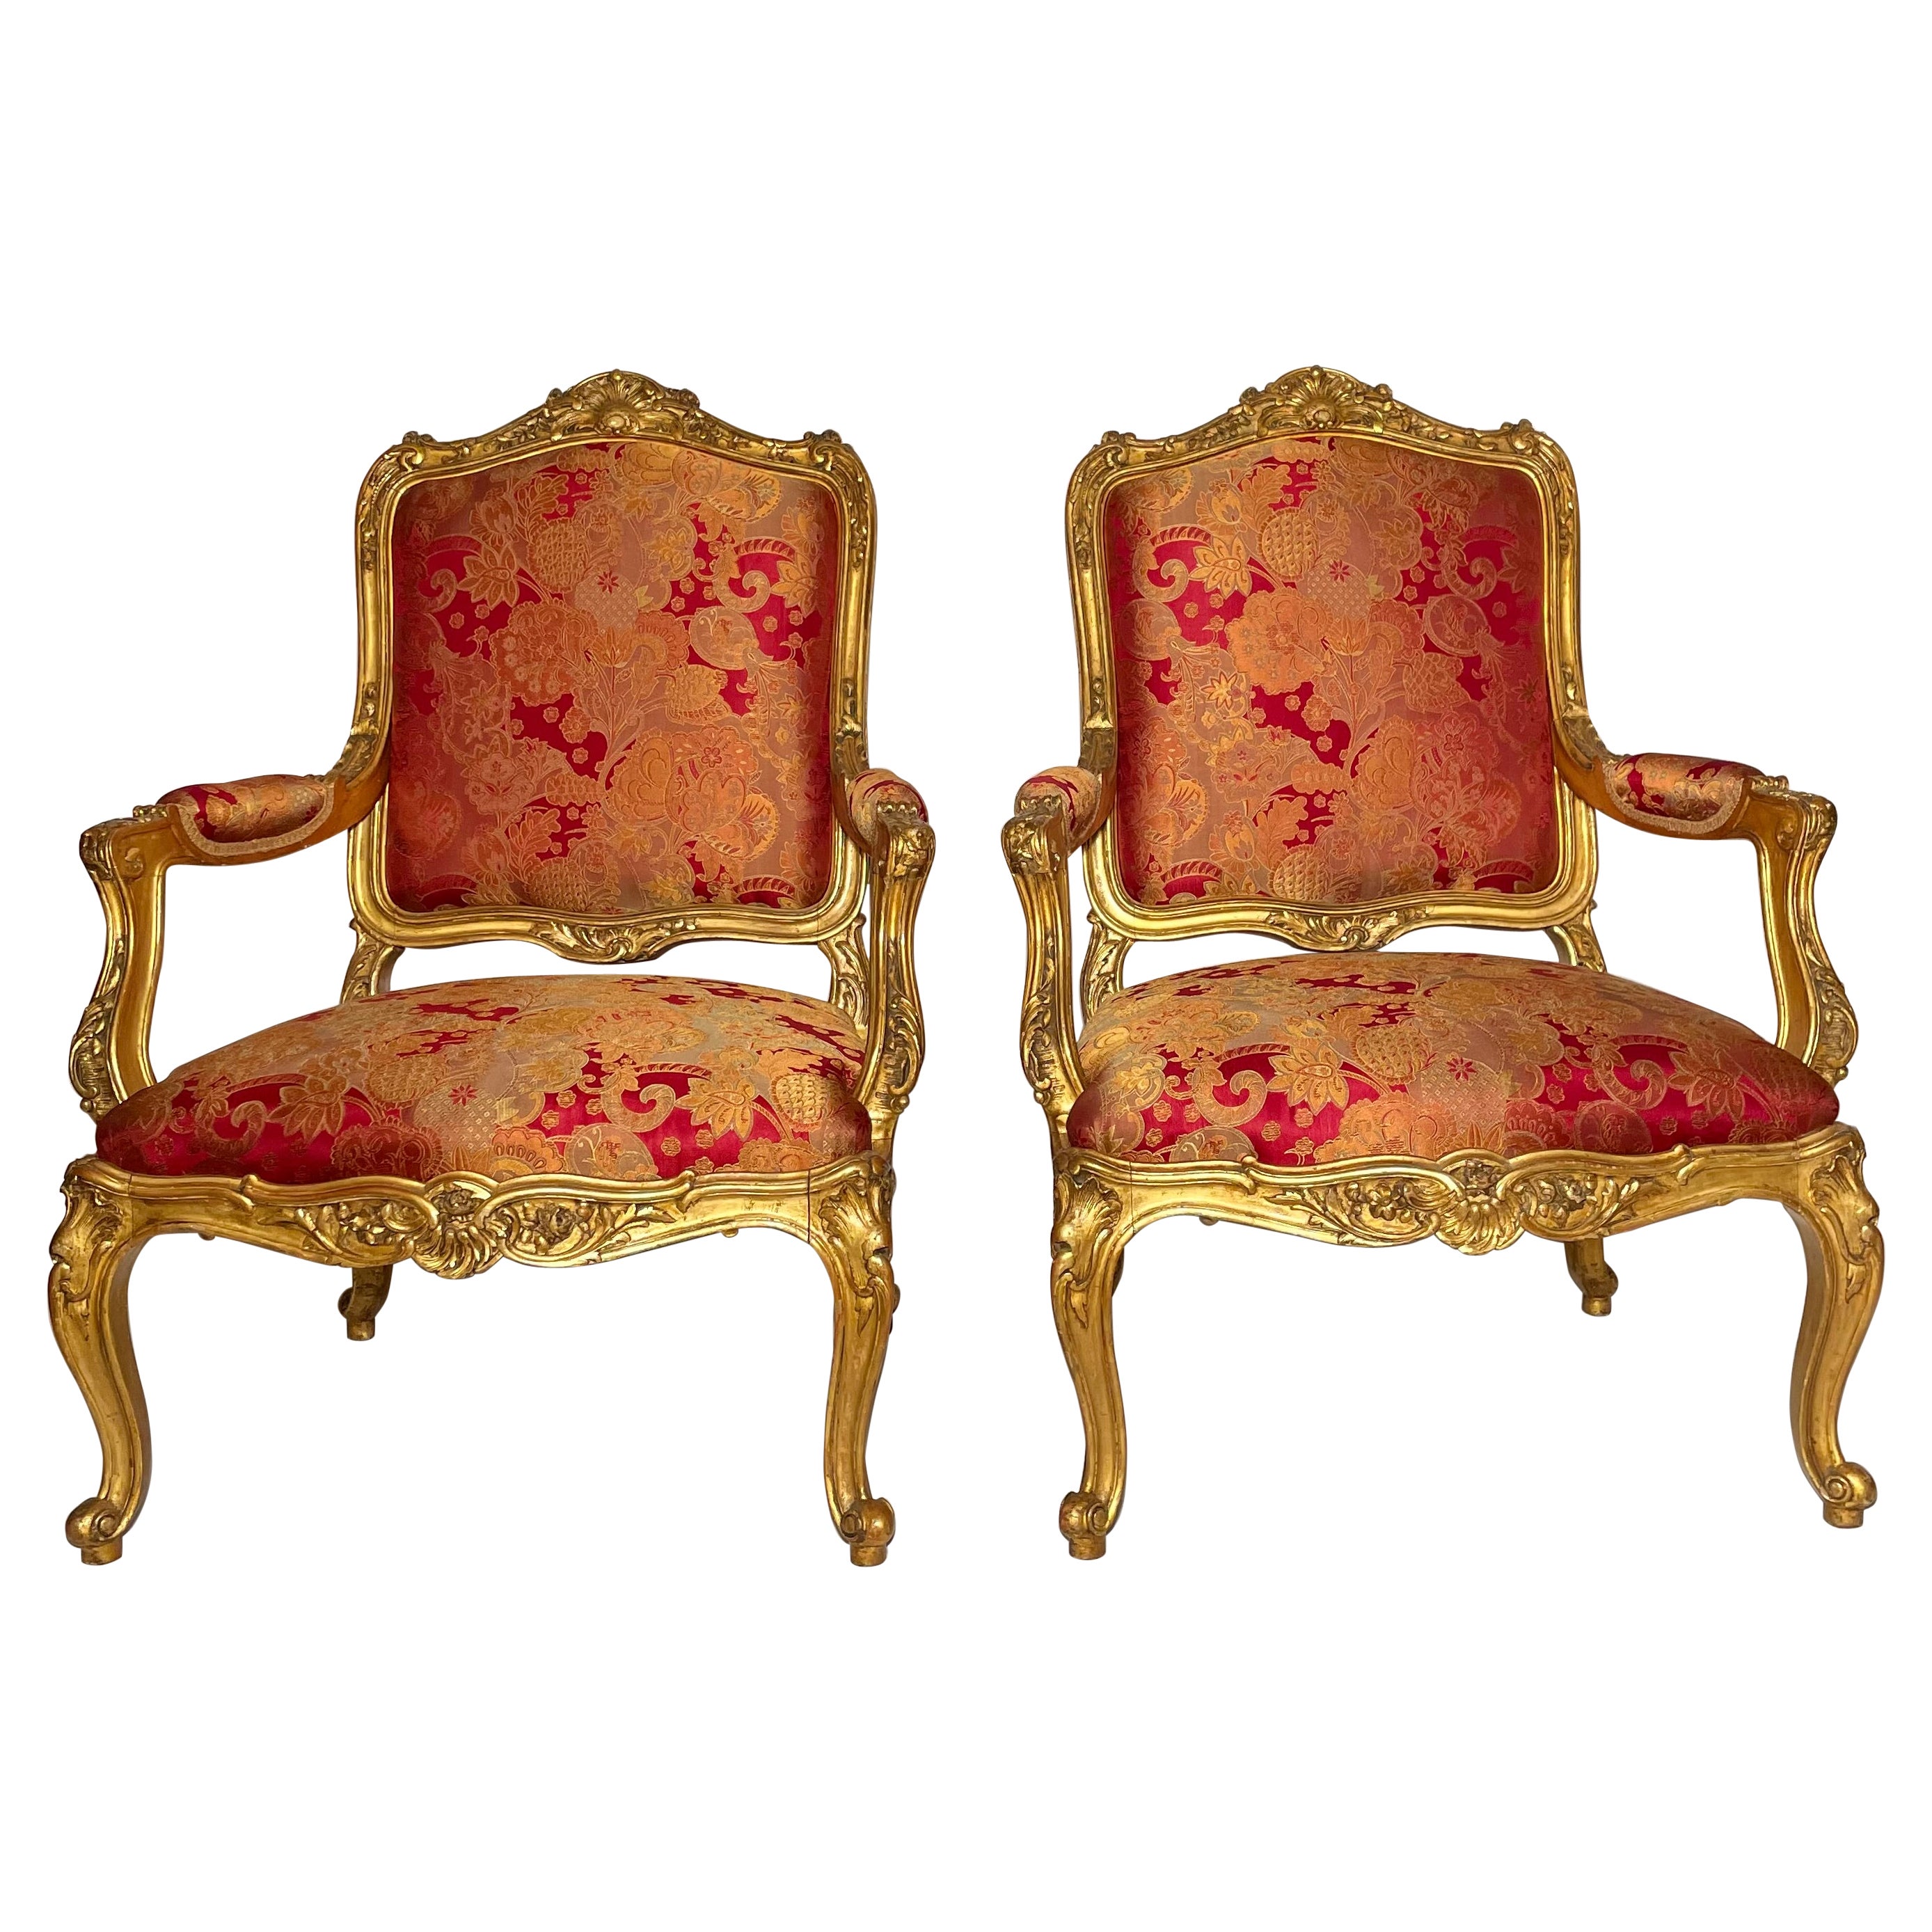 Pair Antique French Régence Gold-Leaf Armchairs, circa 1880